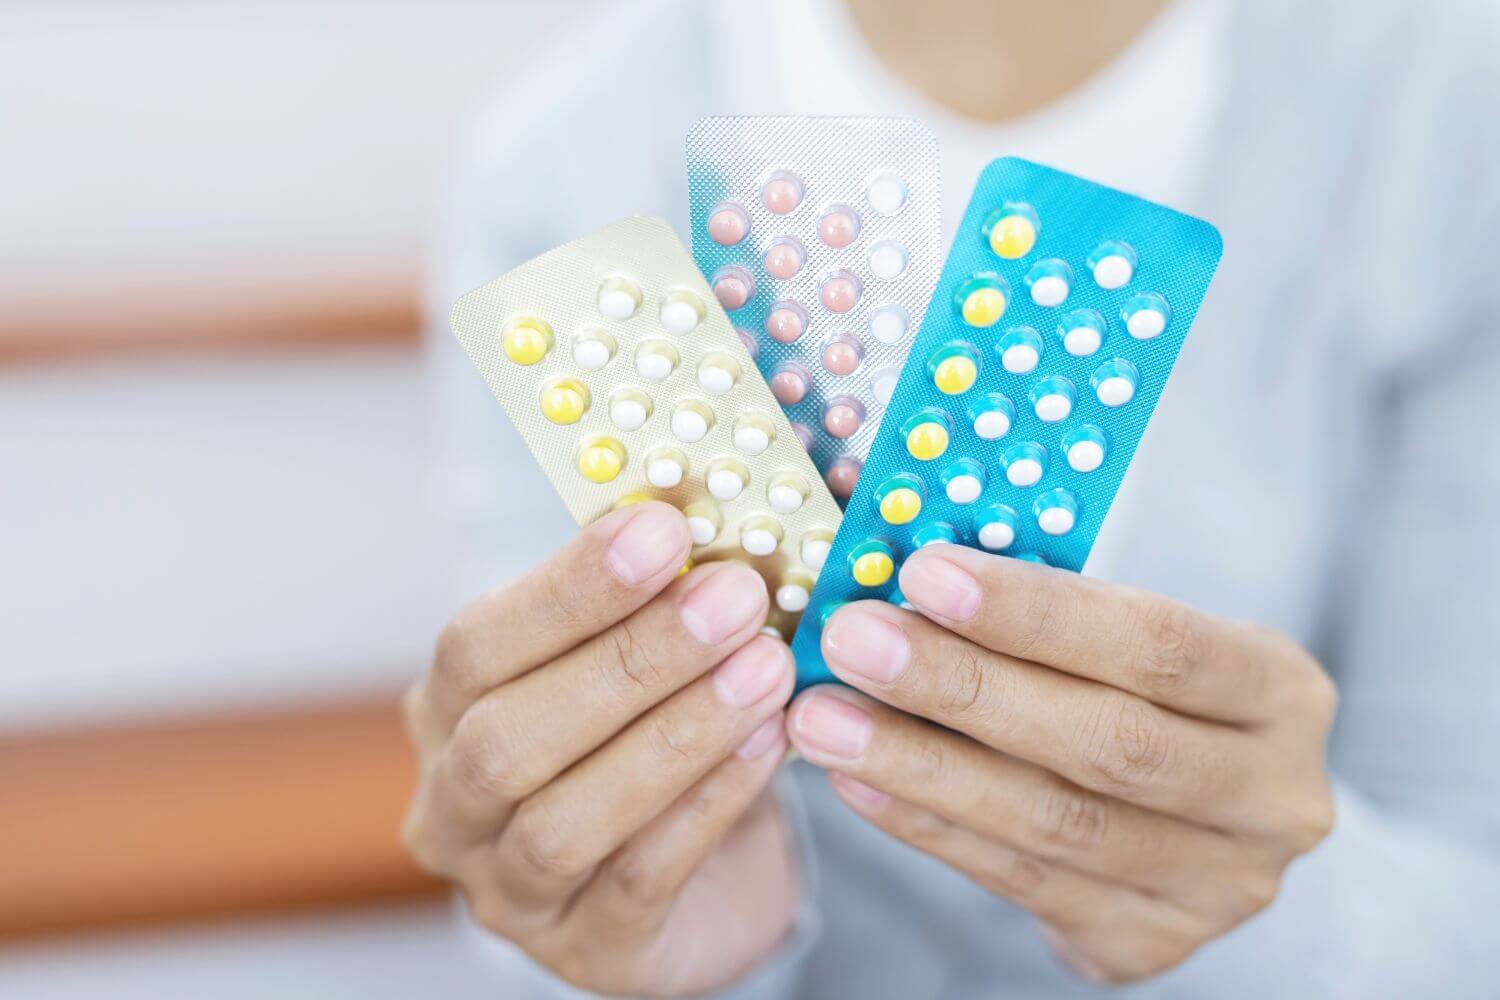 Woman holding 3 packages of contraceptive pills